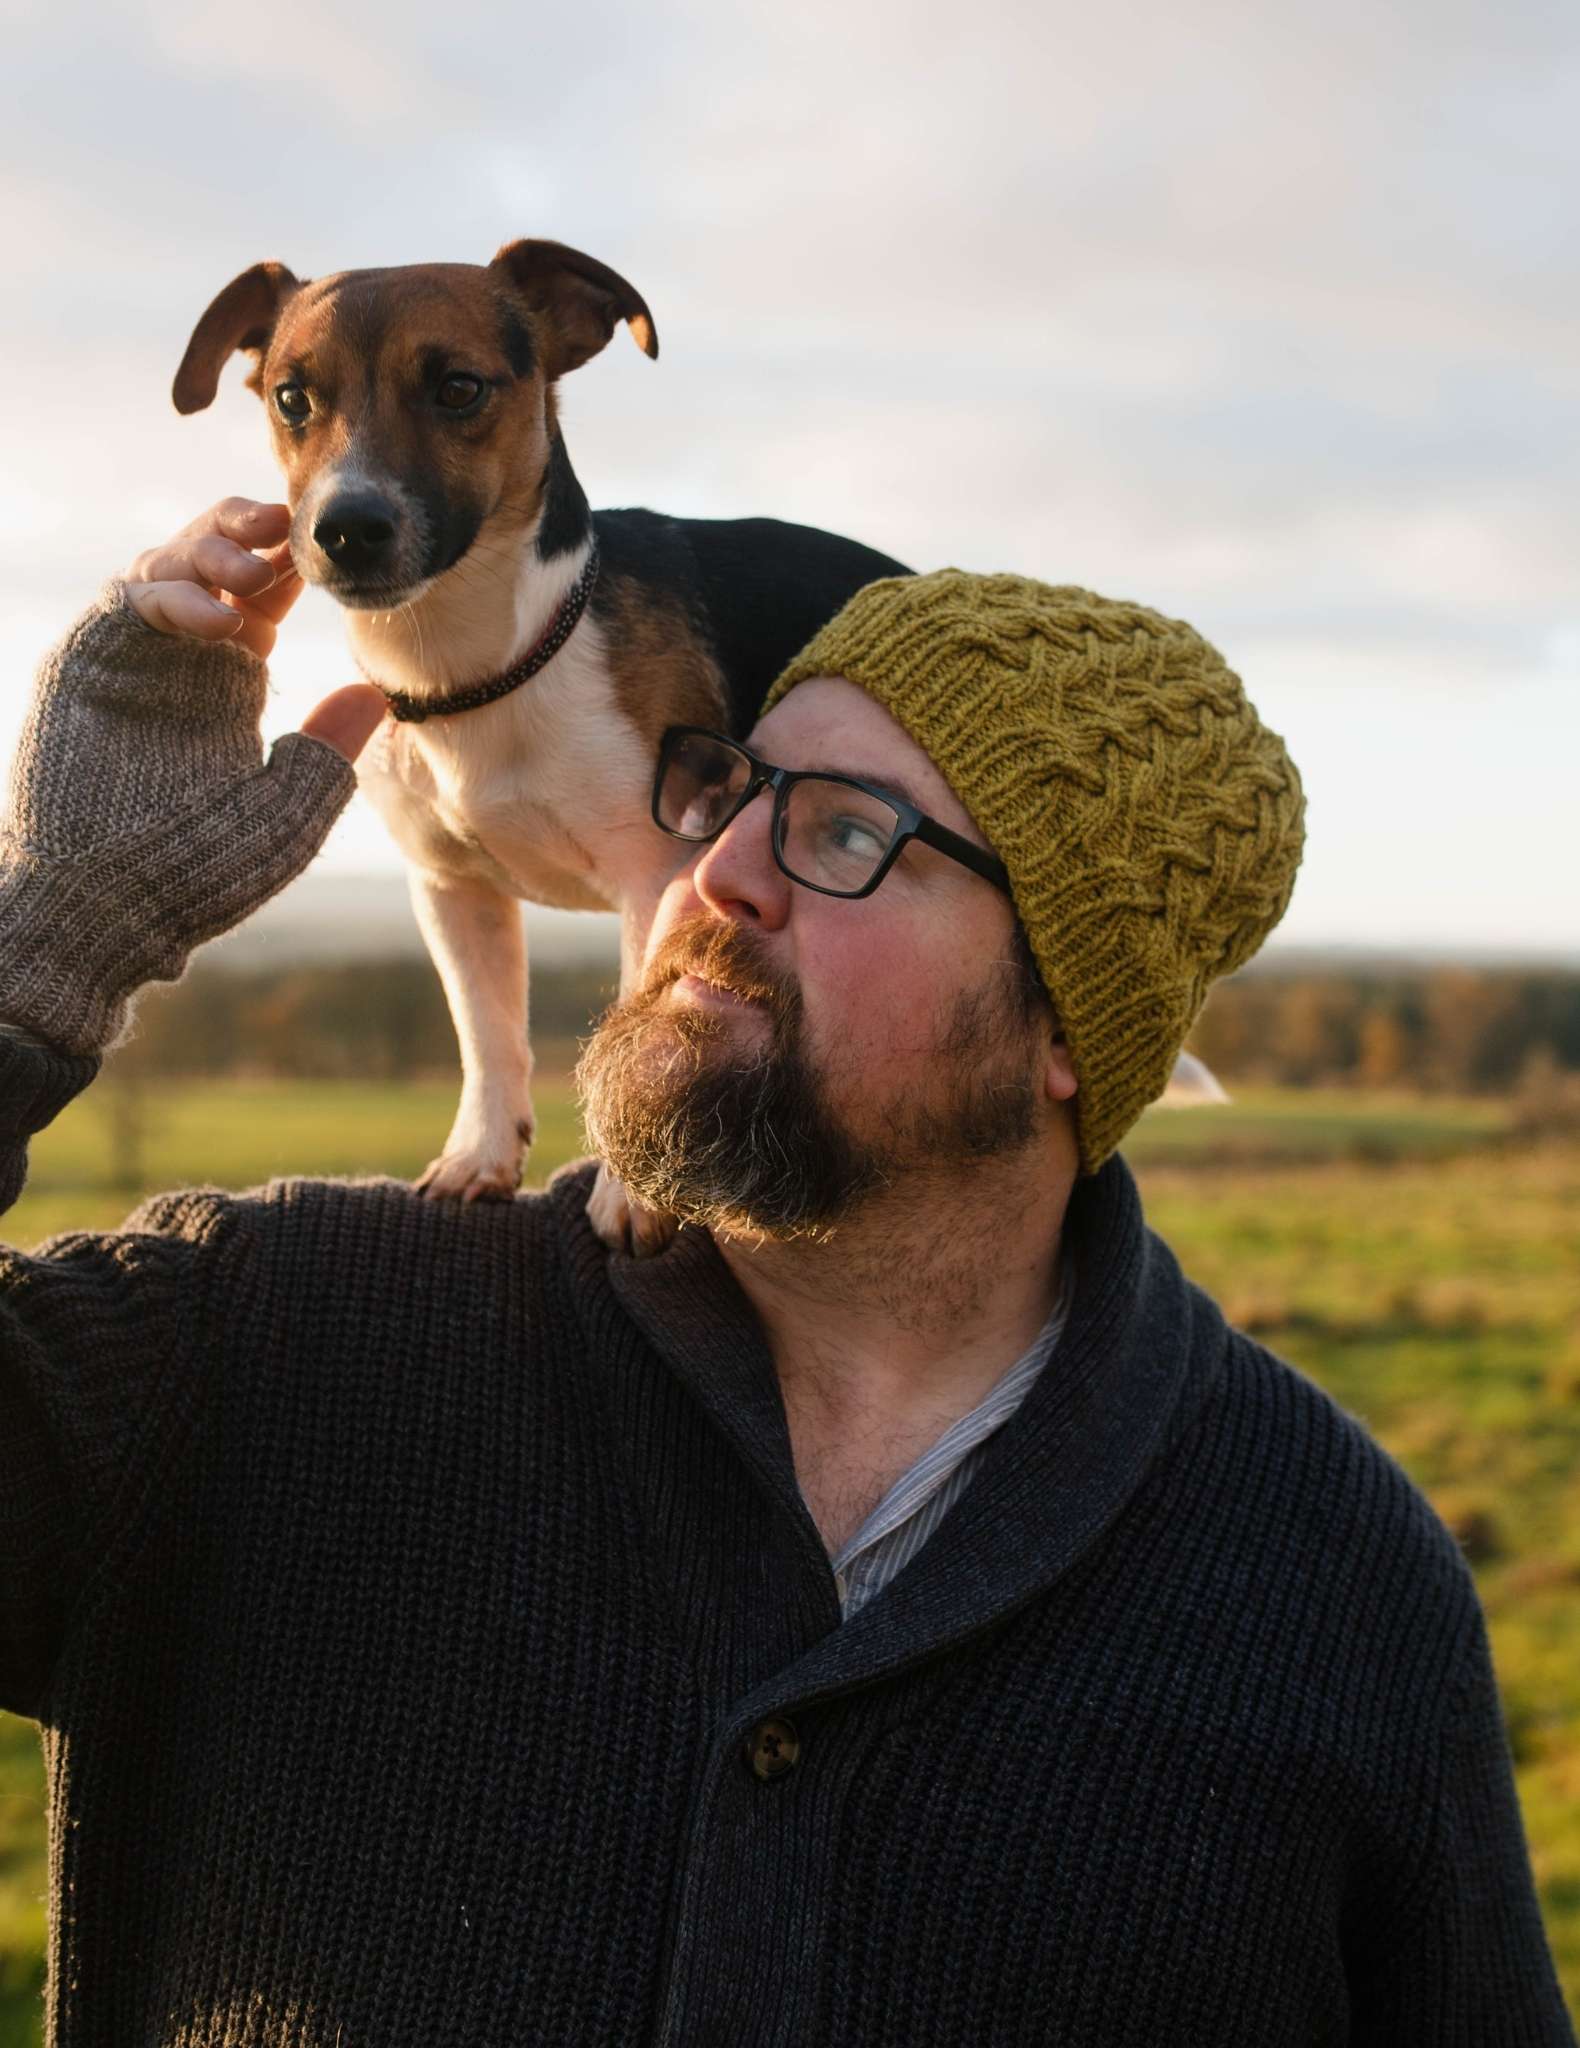 A white man with a beard and glasses stands in a field wearing a cabled green beanie hat. There is a small brown, white and dark dog standing across his shoulders and he has his hand raised towards it.